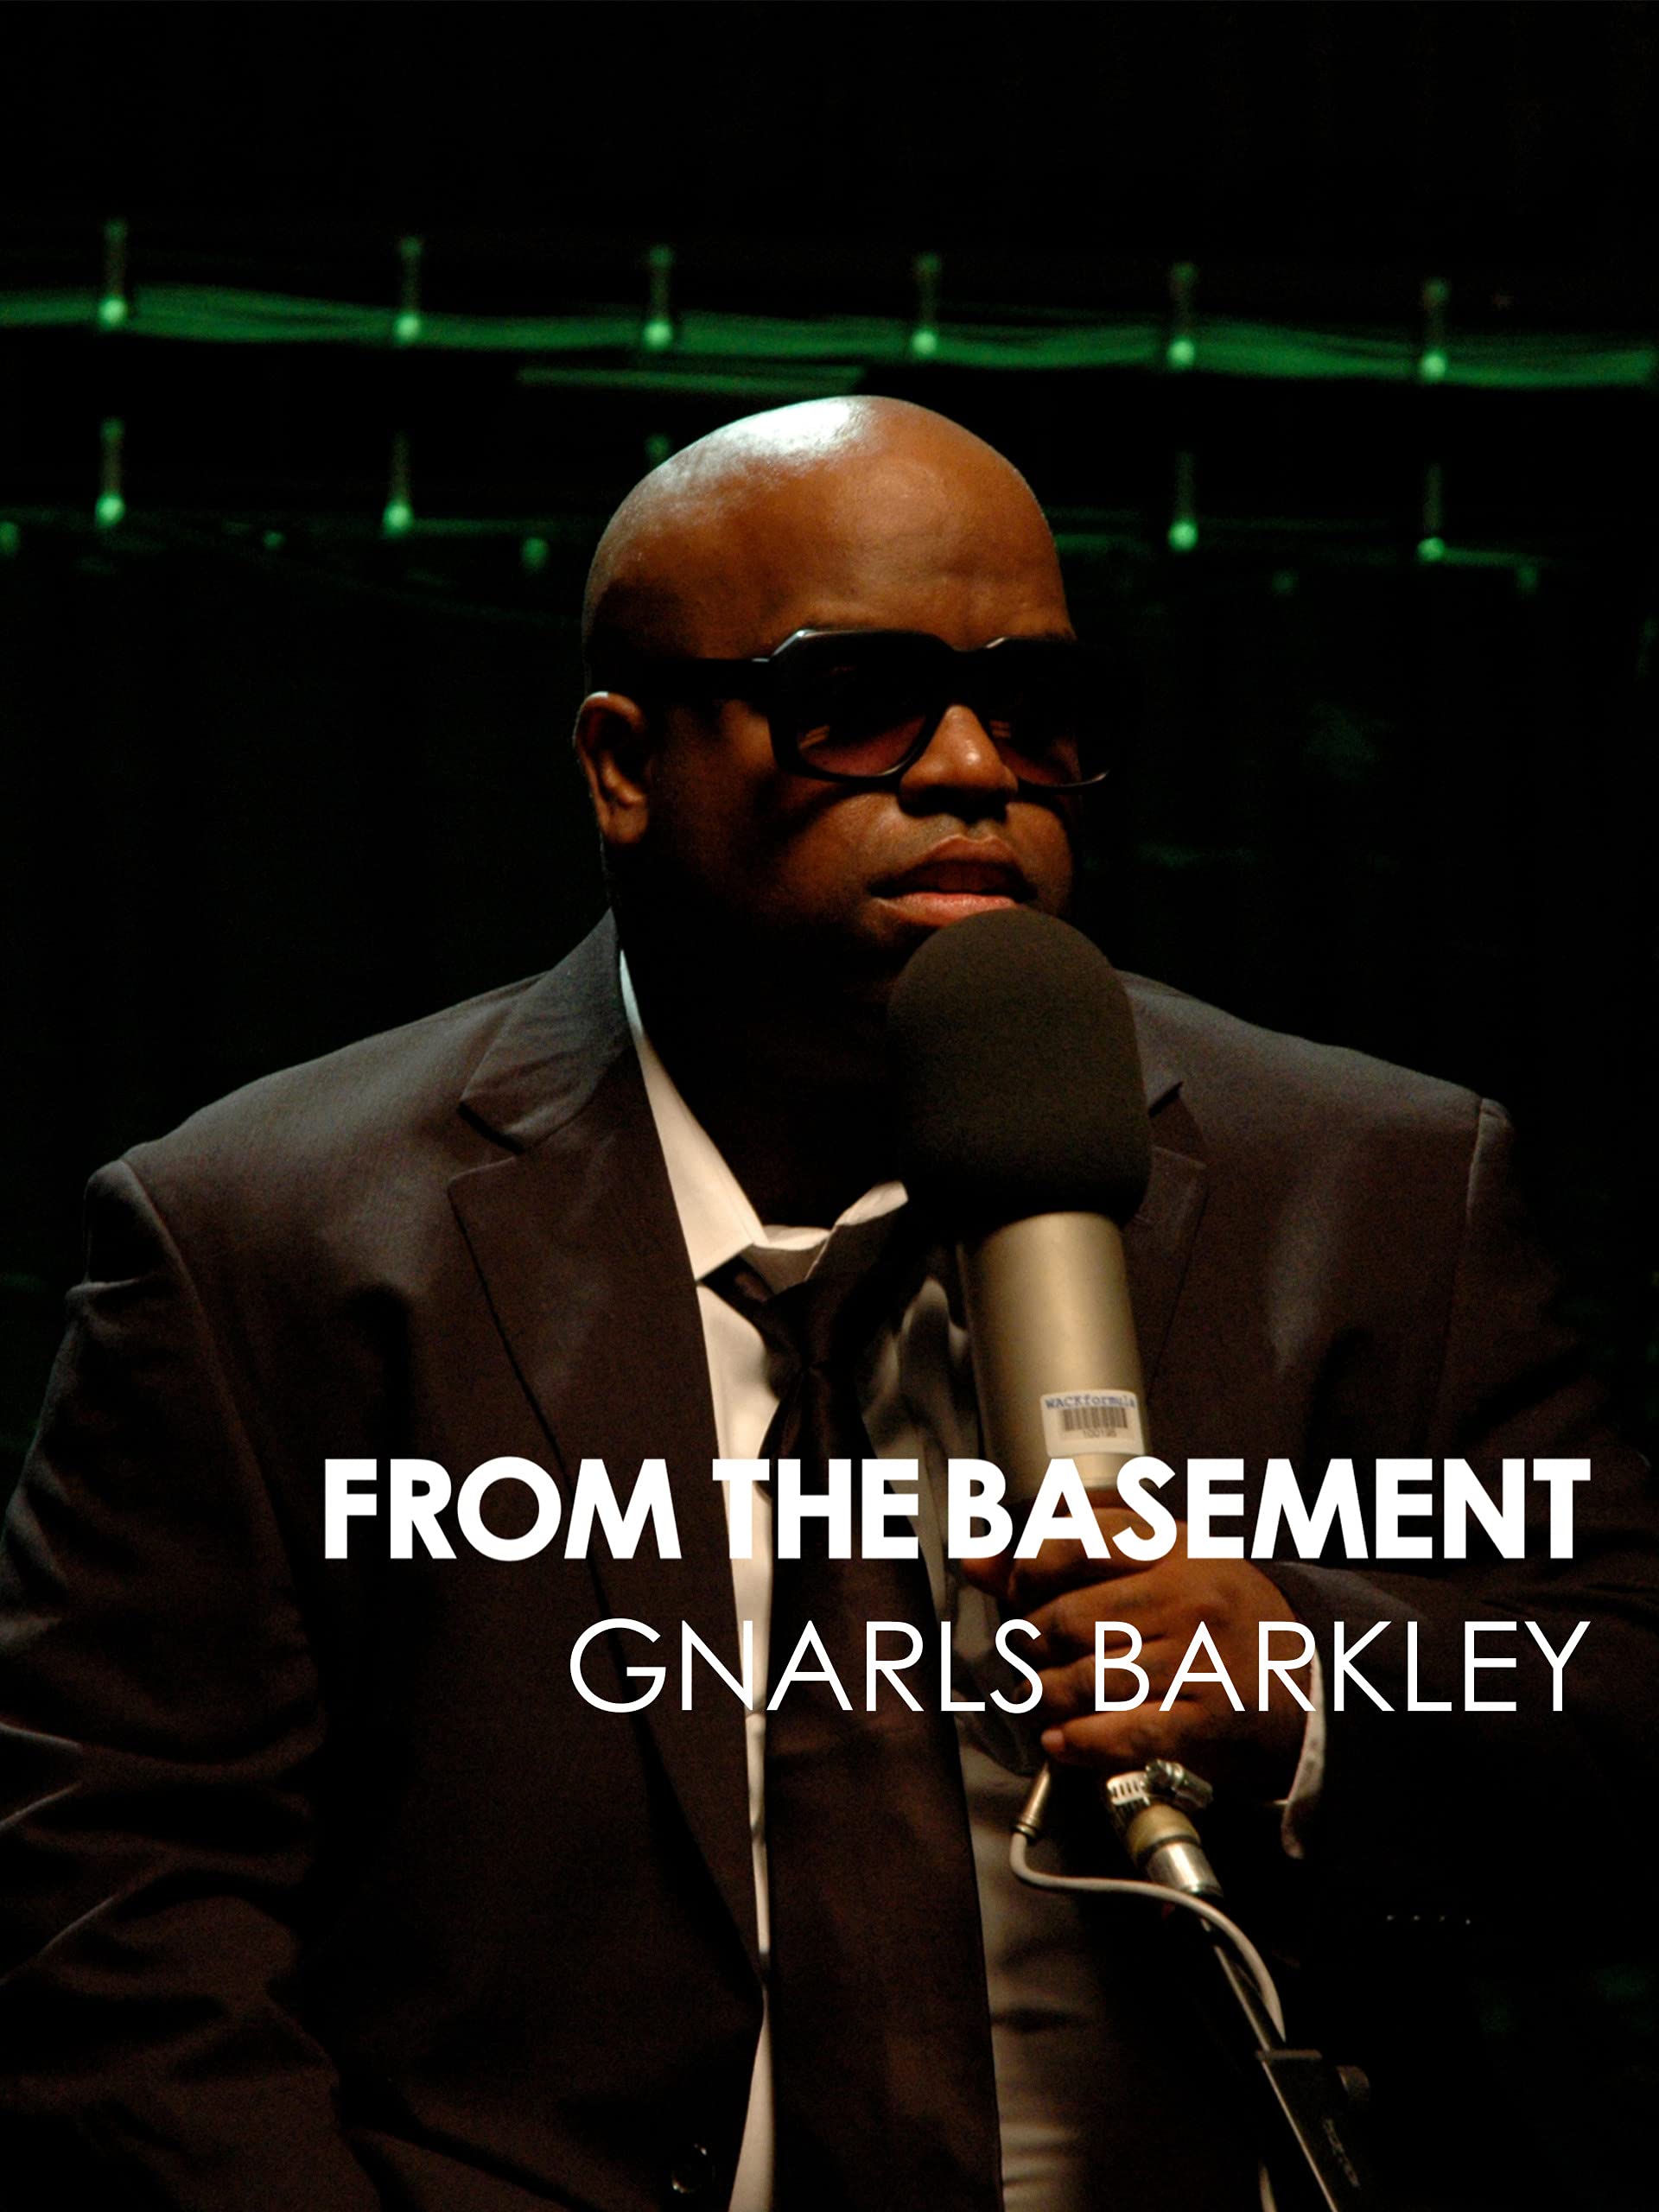 7 Gnarls Barkley Quotes About Life